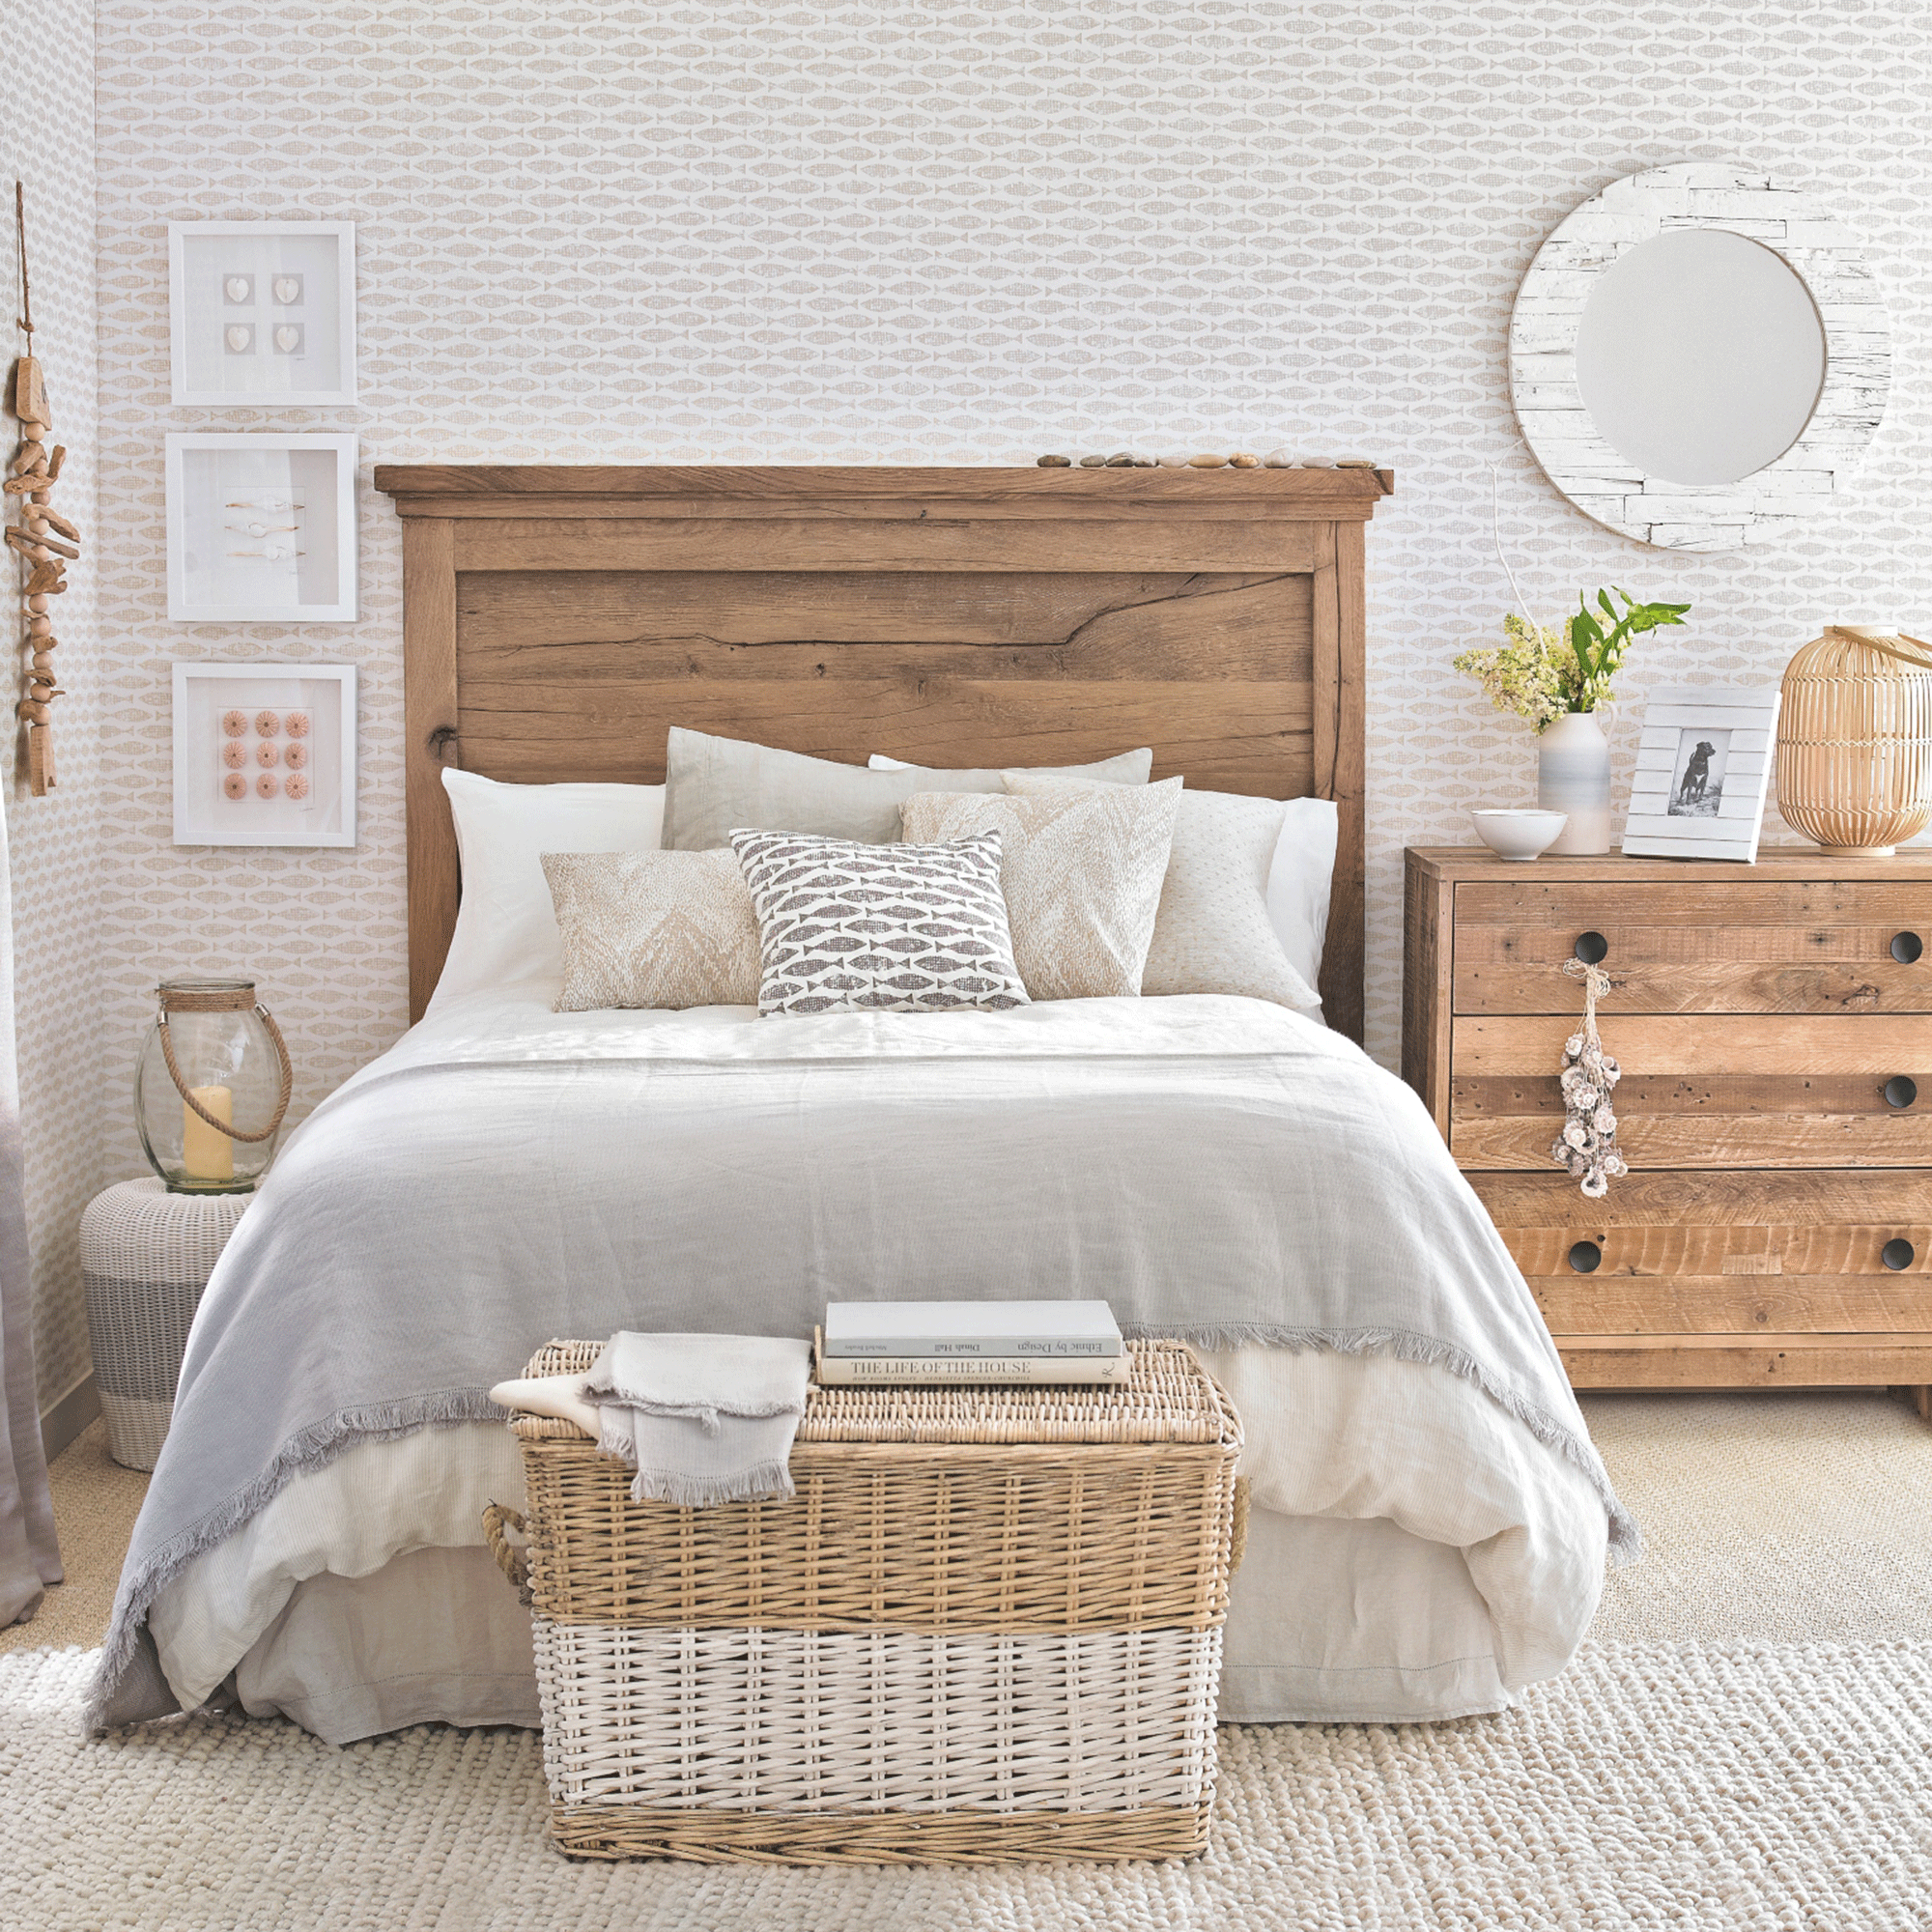 White bedroom with wooden furniture